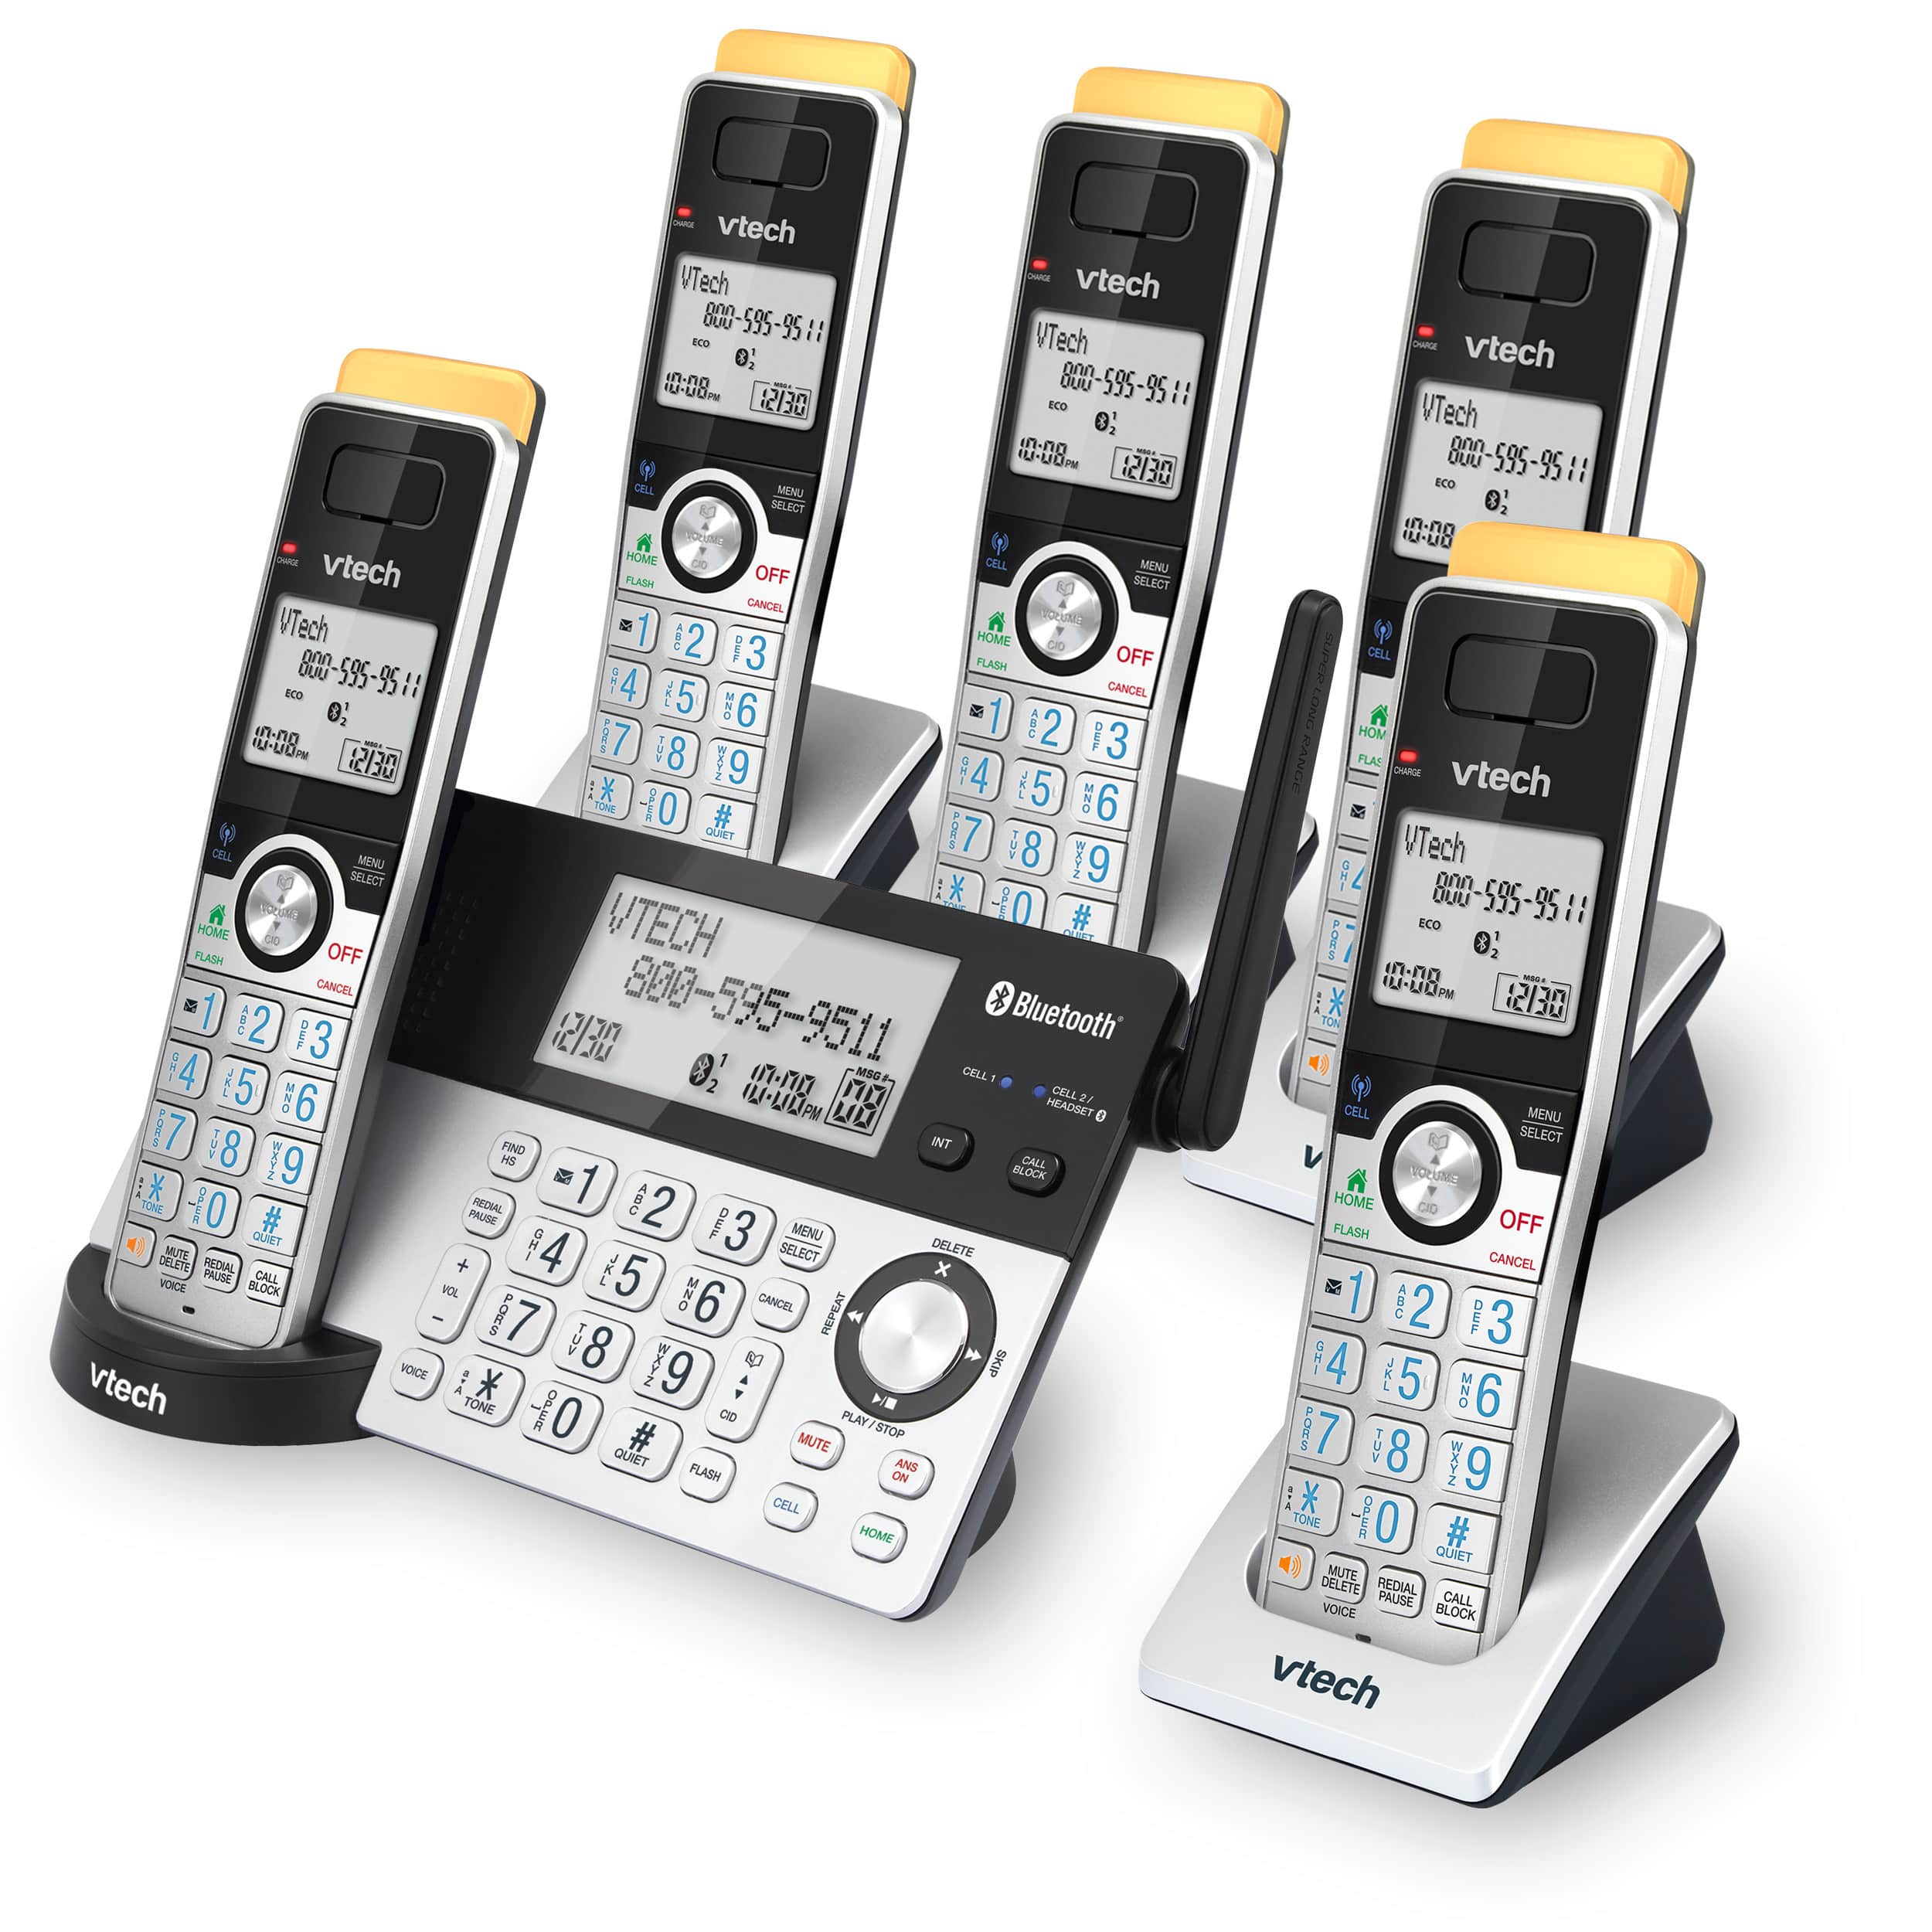 5-Handset Cordless Phone with Super Long Range, Bluetooth Connect to Cell, Smart Call Blocker and Answering System - view 8